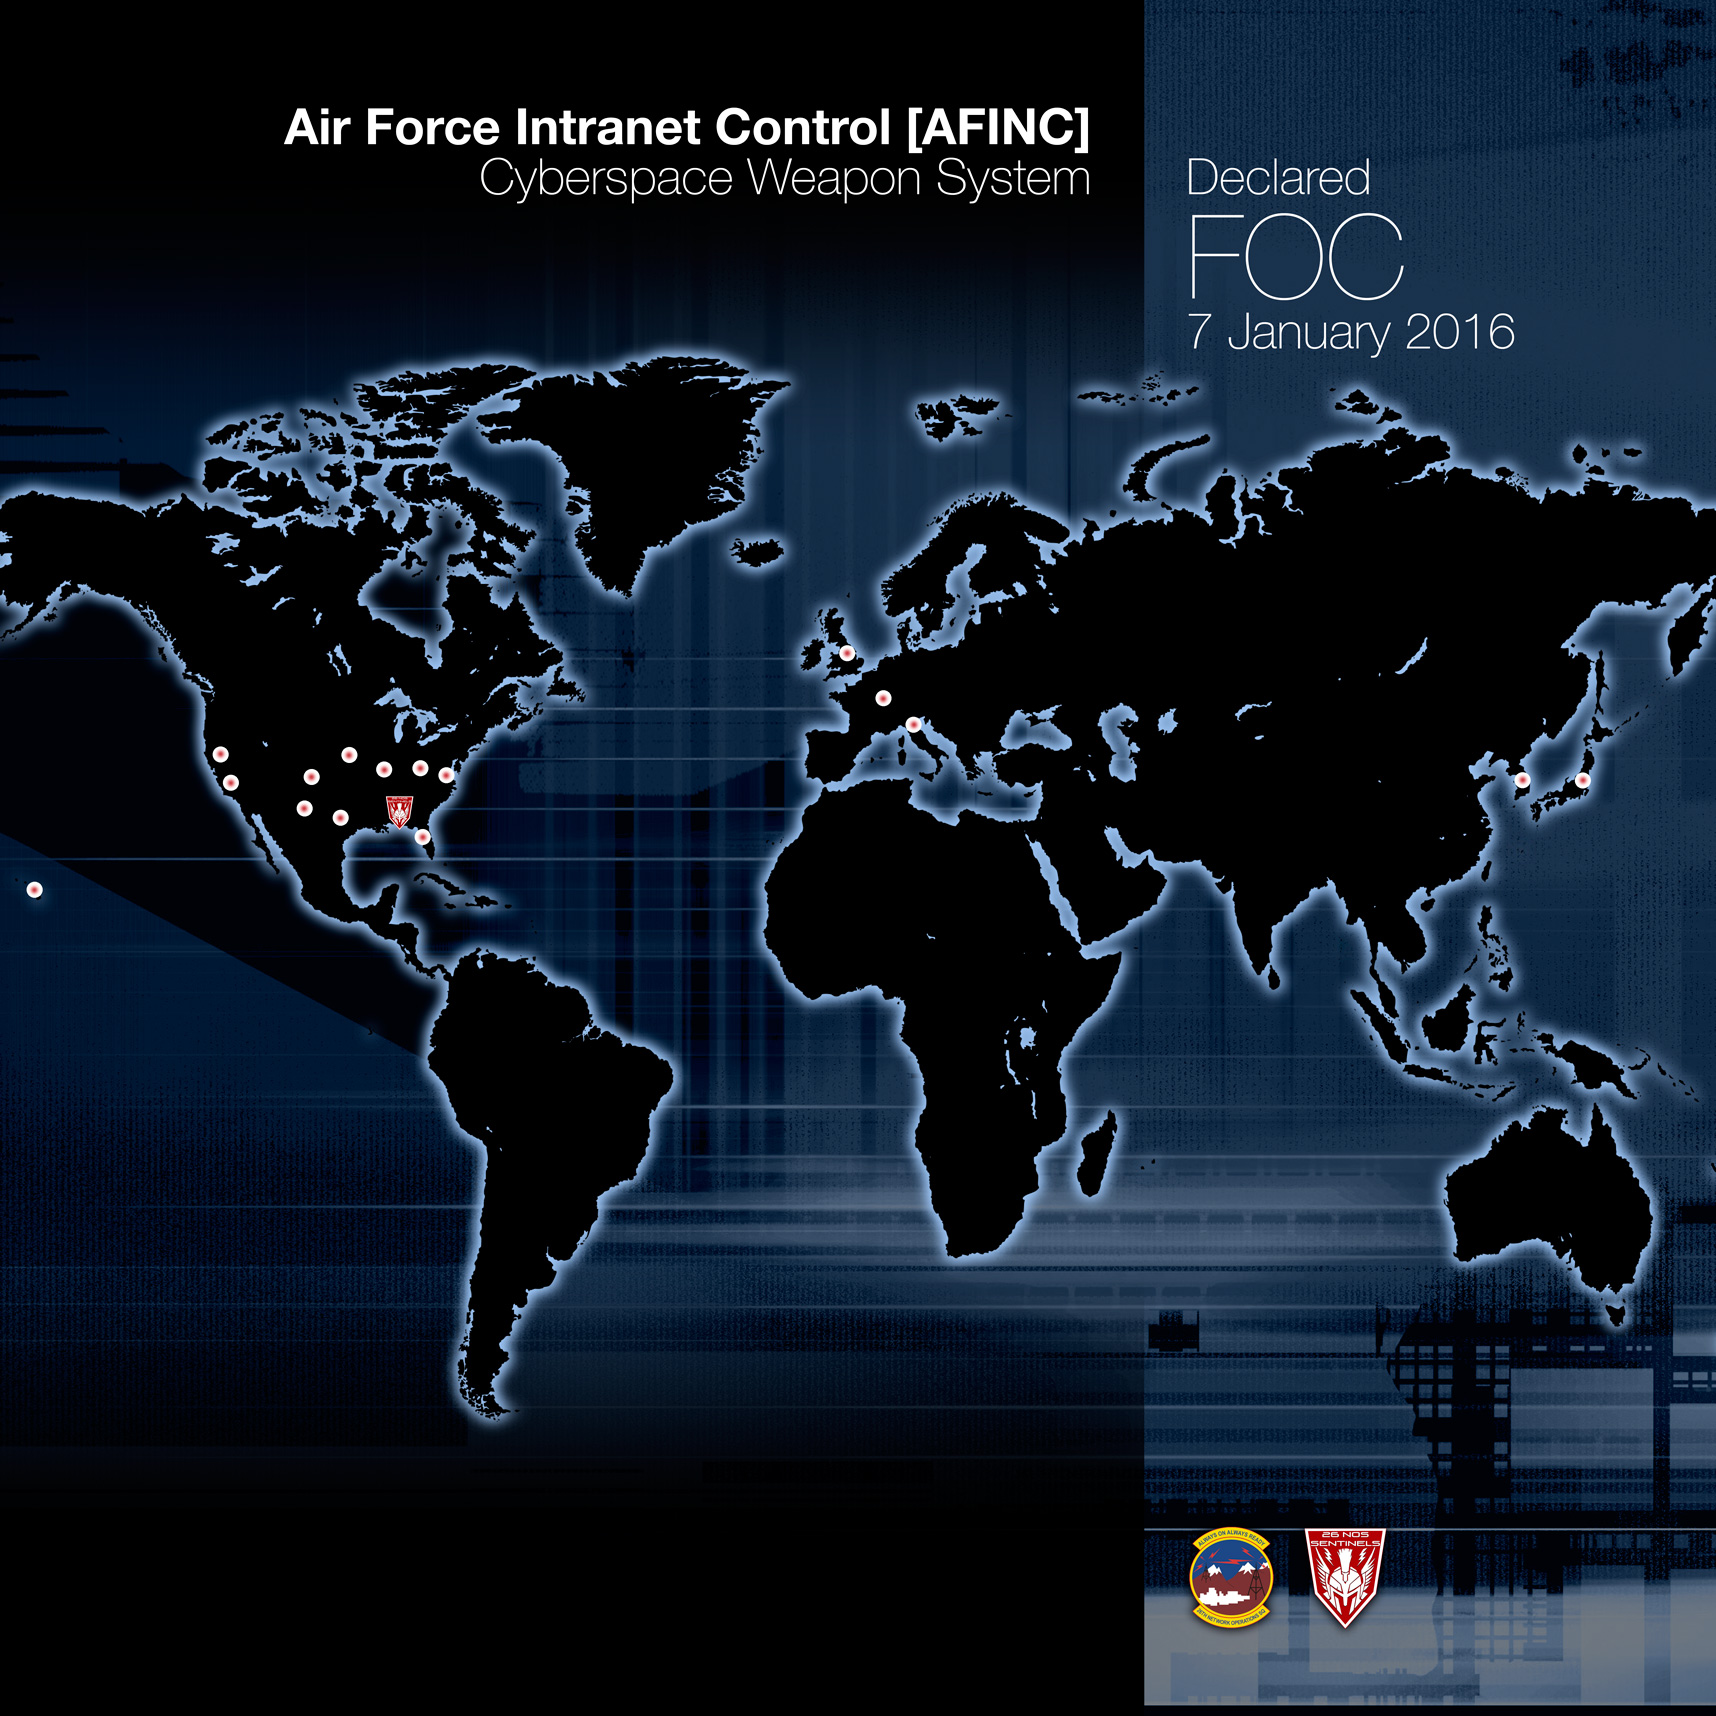 First U.S. cyberspace weapon now fully functional, says Air Force